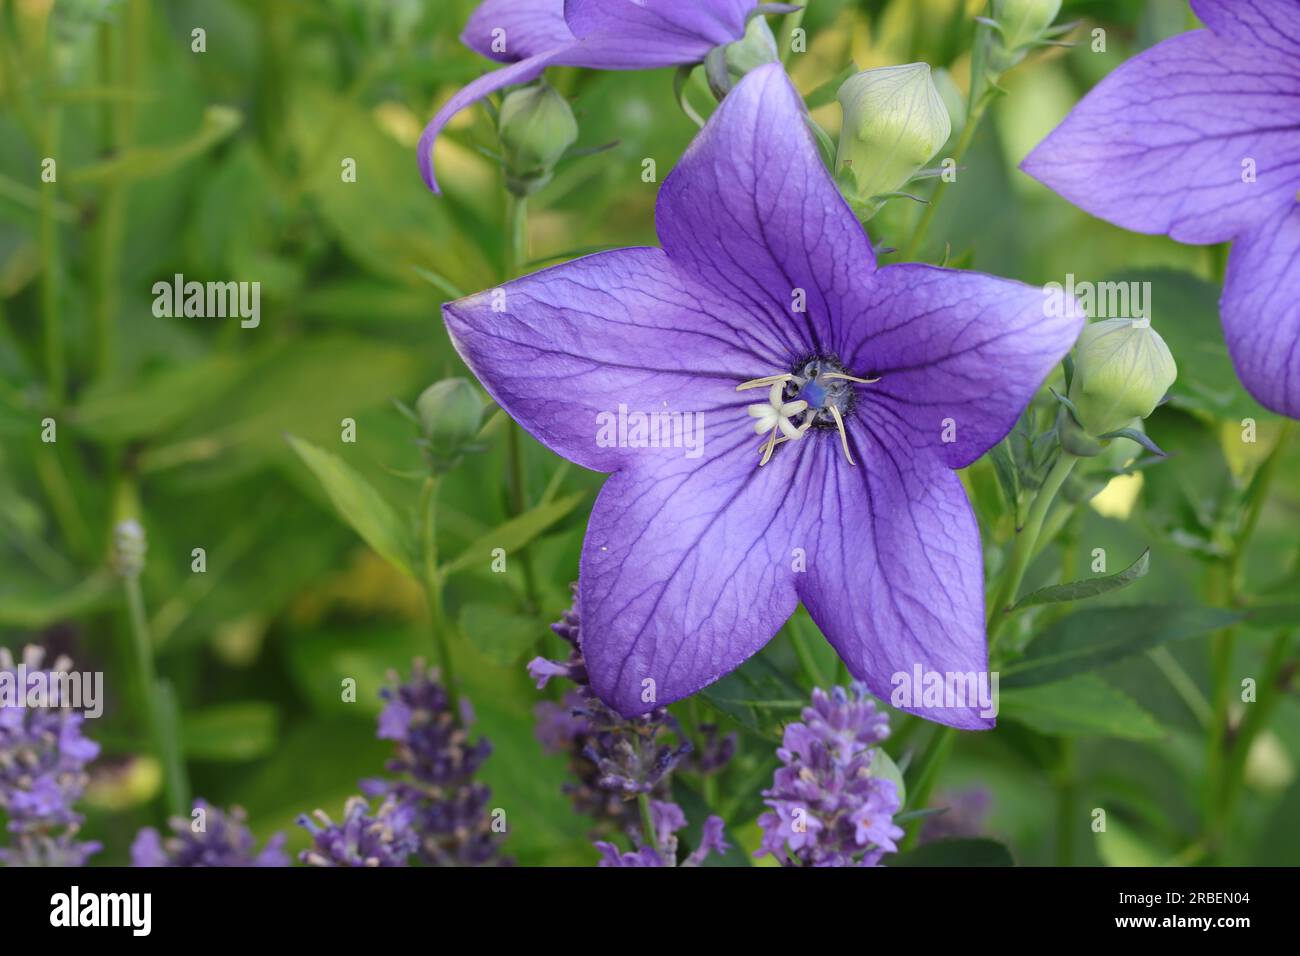 Close-up of a beautiful blue Platycodon grandiflora flower and some blue lavender flowers in a garden bed Stock Photo